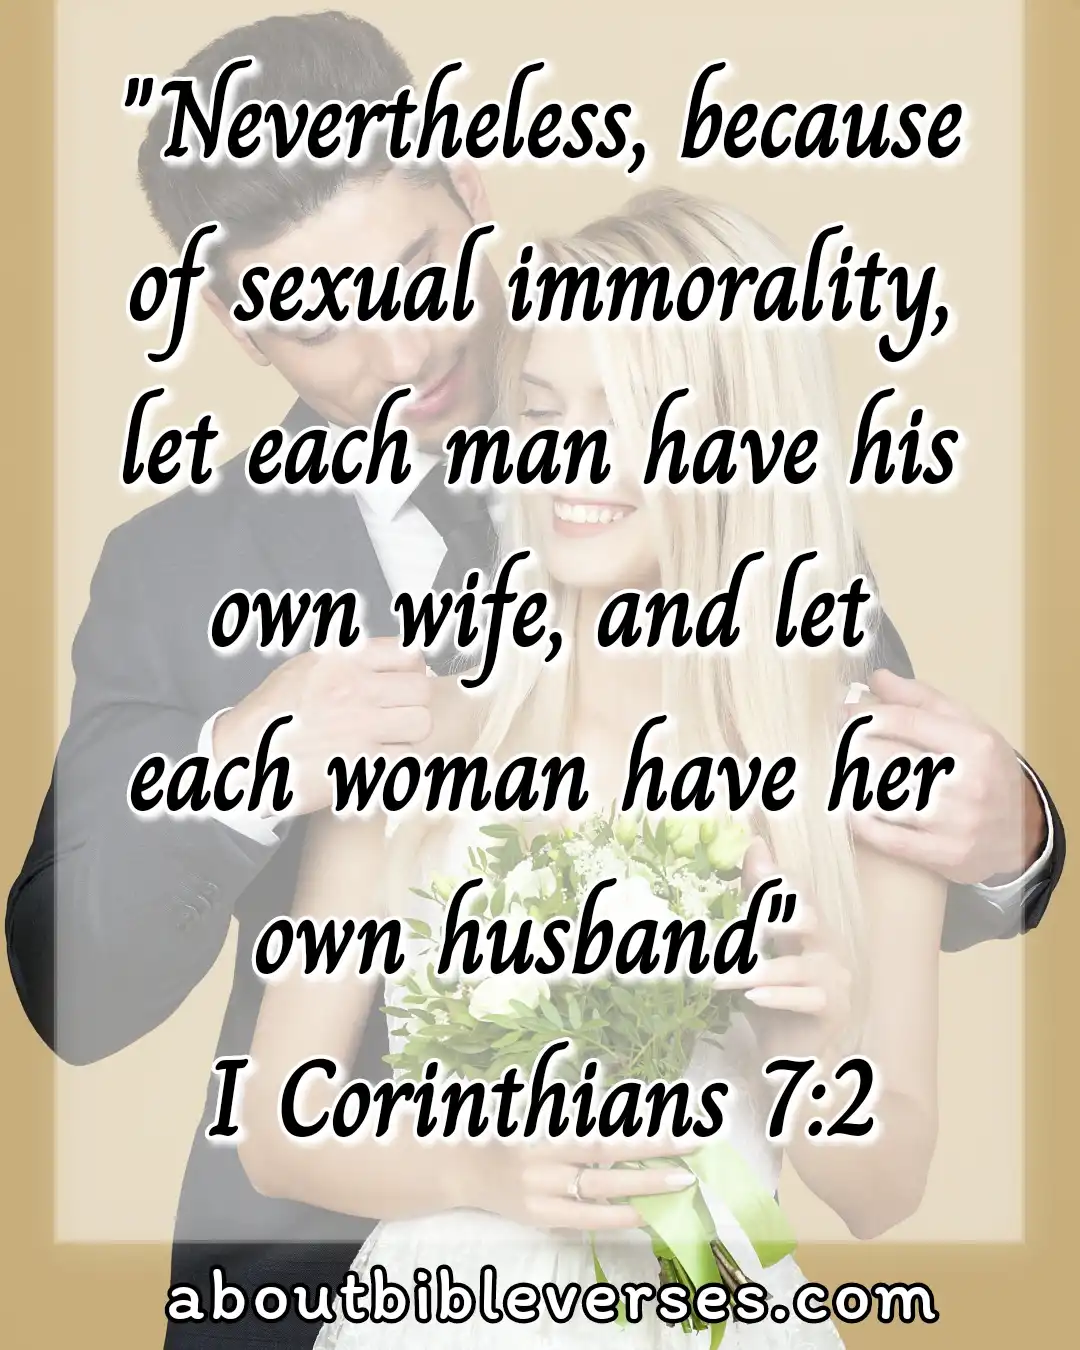 Bible Verses About Morality And Ethics (1 Corinthians 7:2)